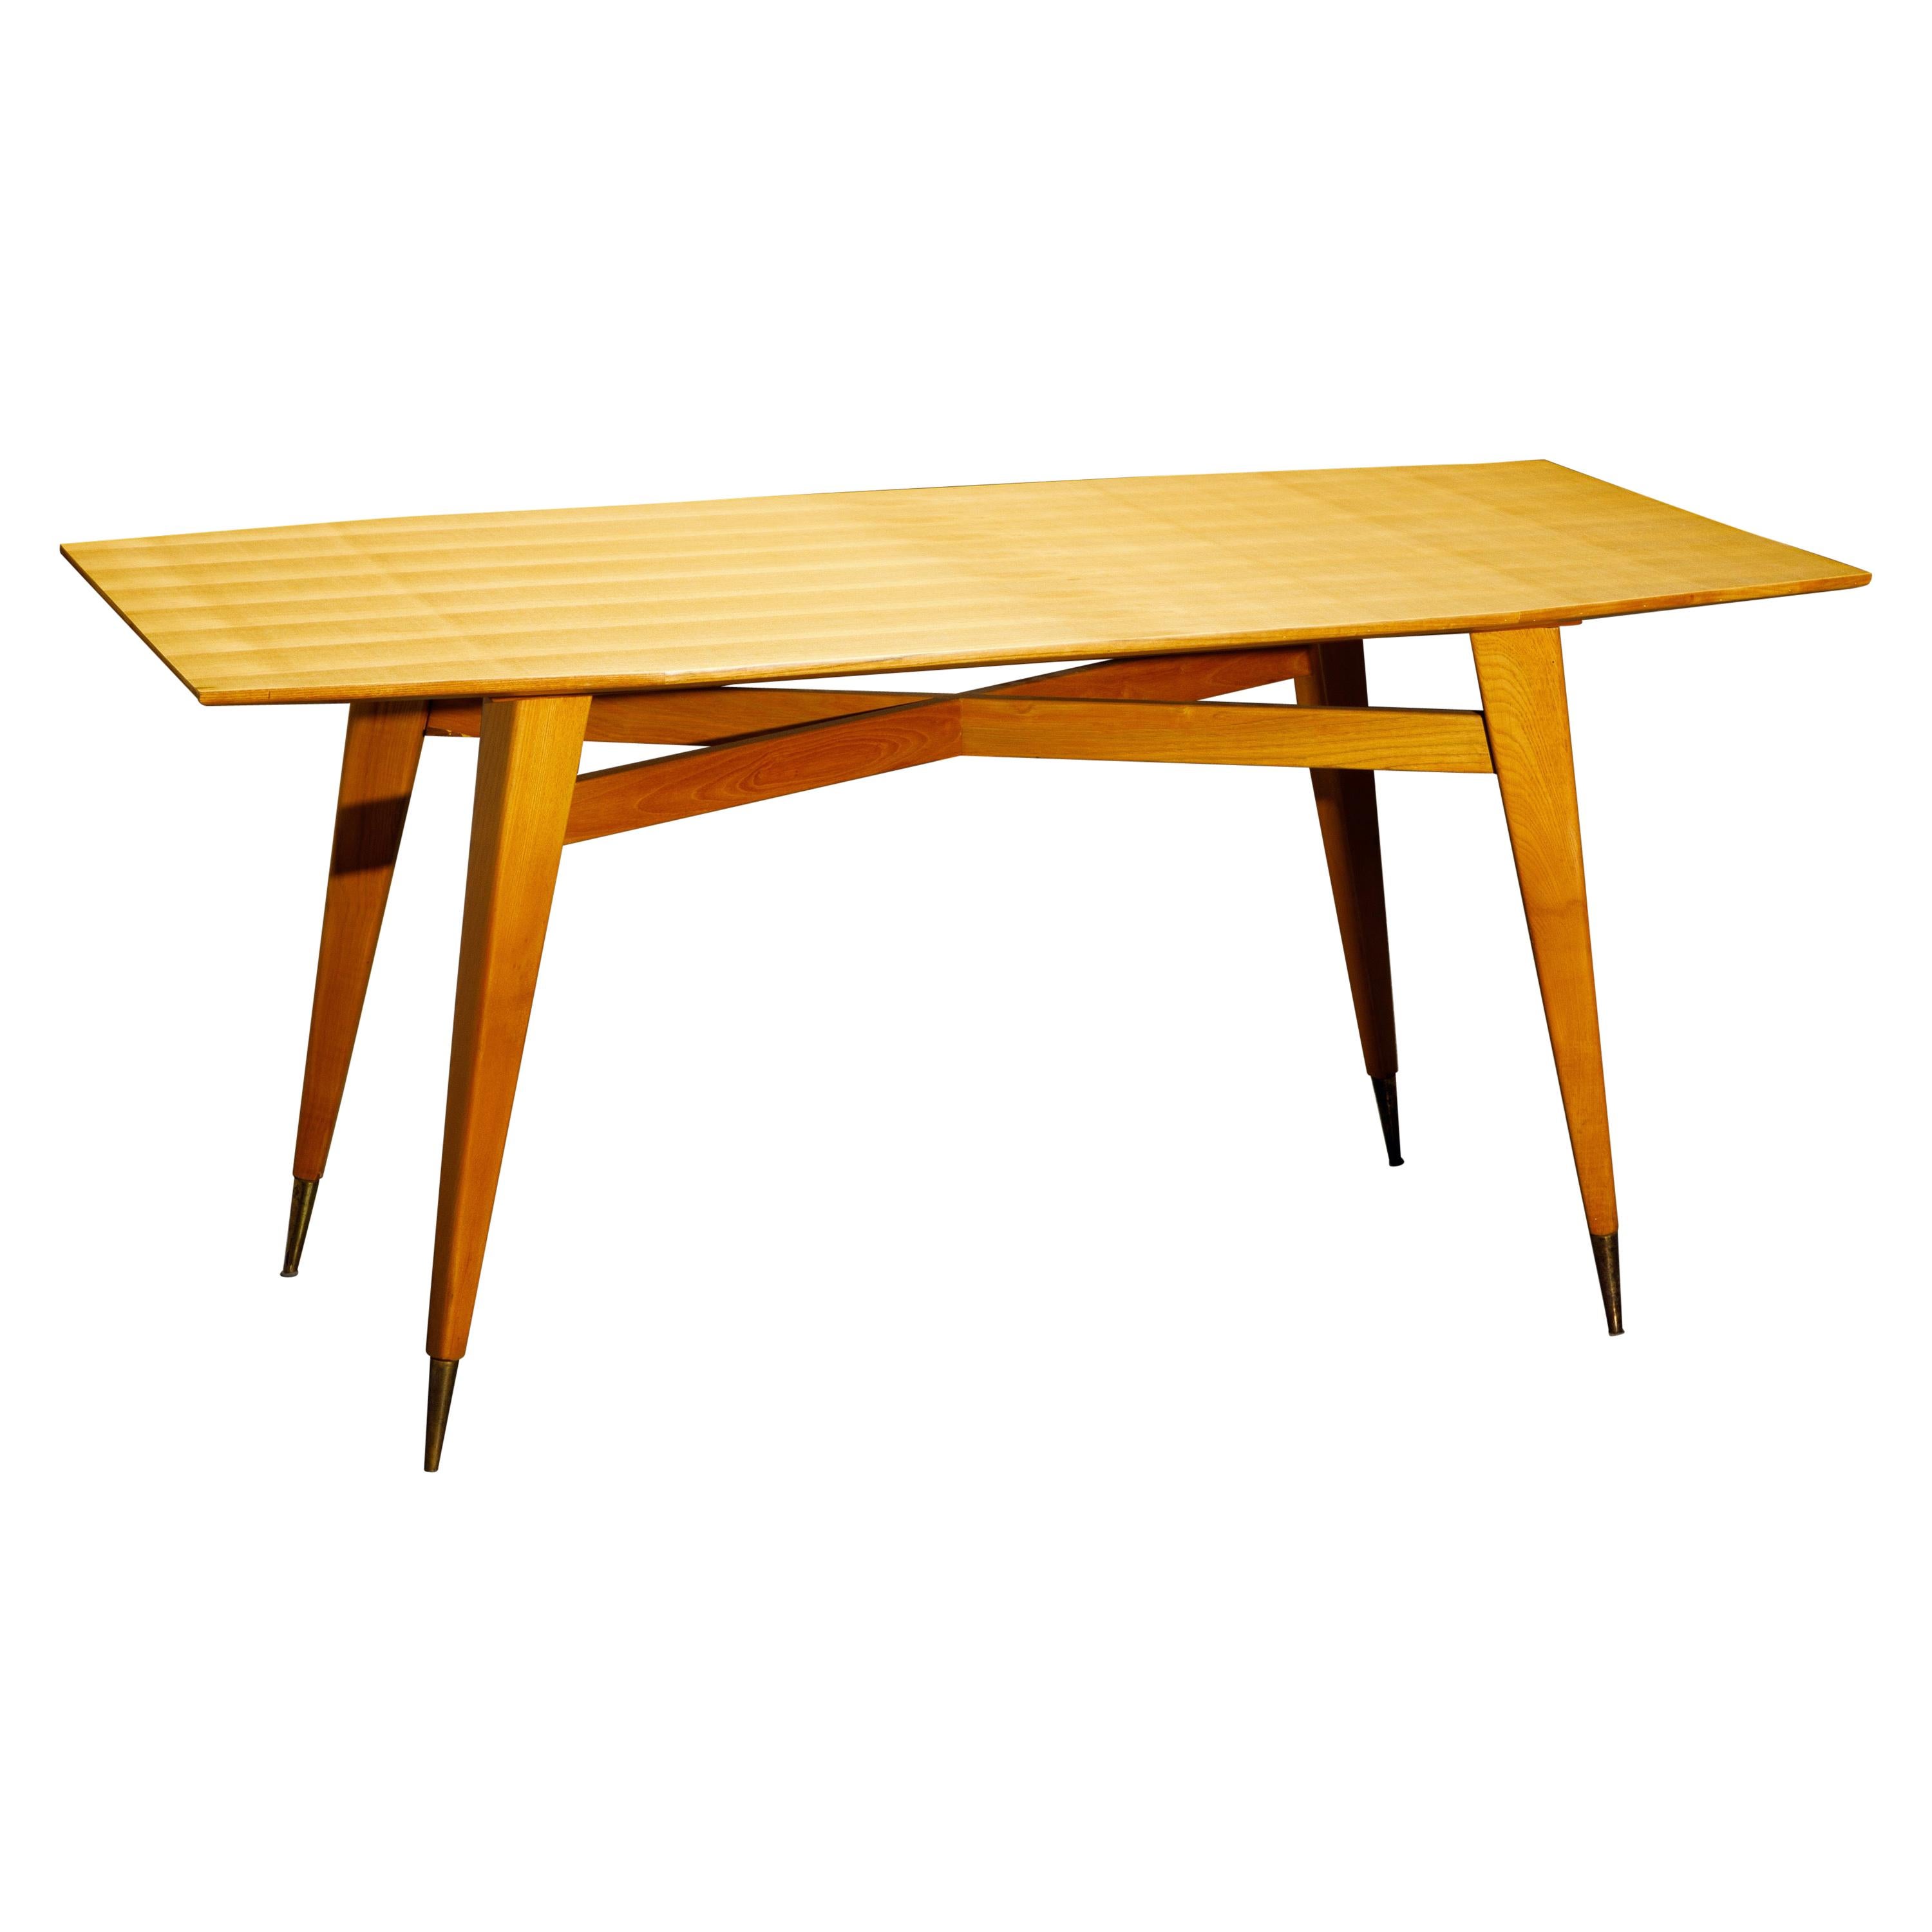 Gio Ponti Sculptural Veined Ash Dining Table or Desk, circa 1950, Italy